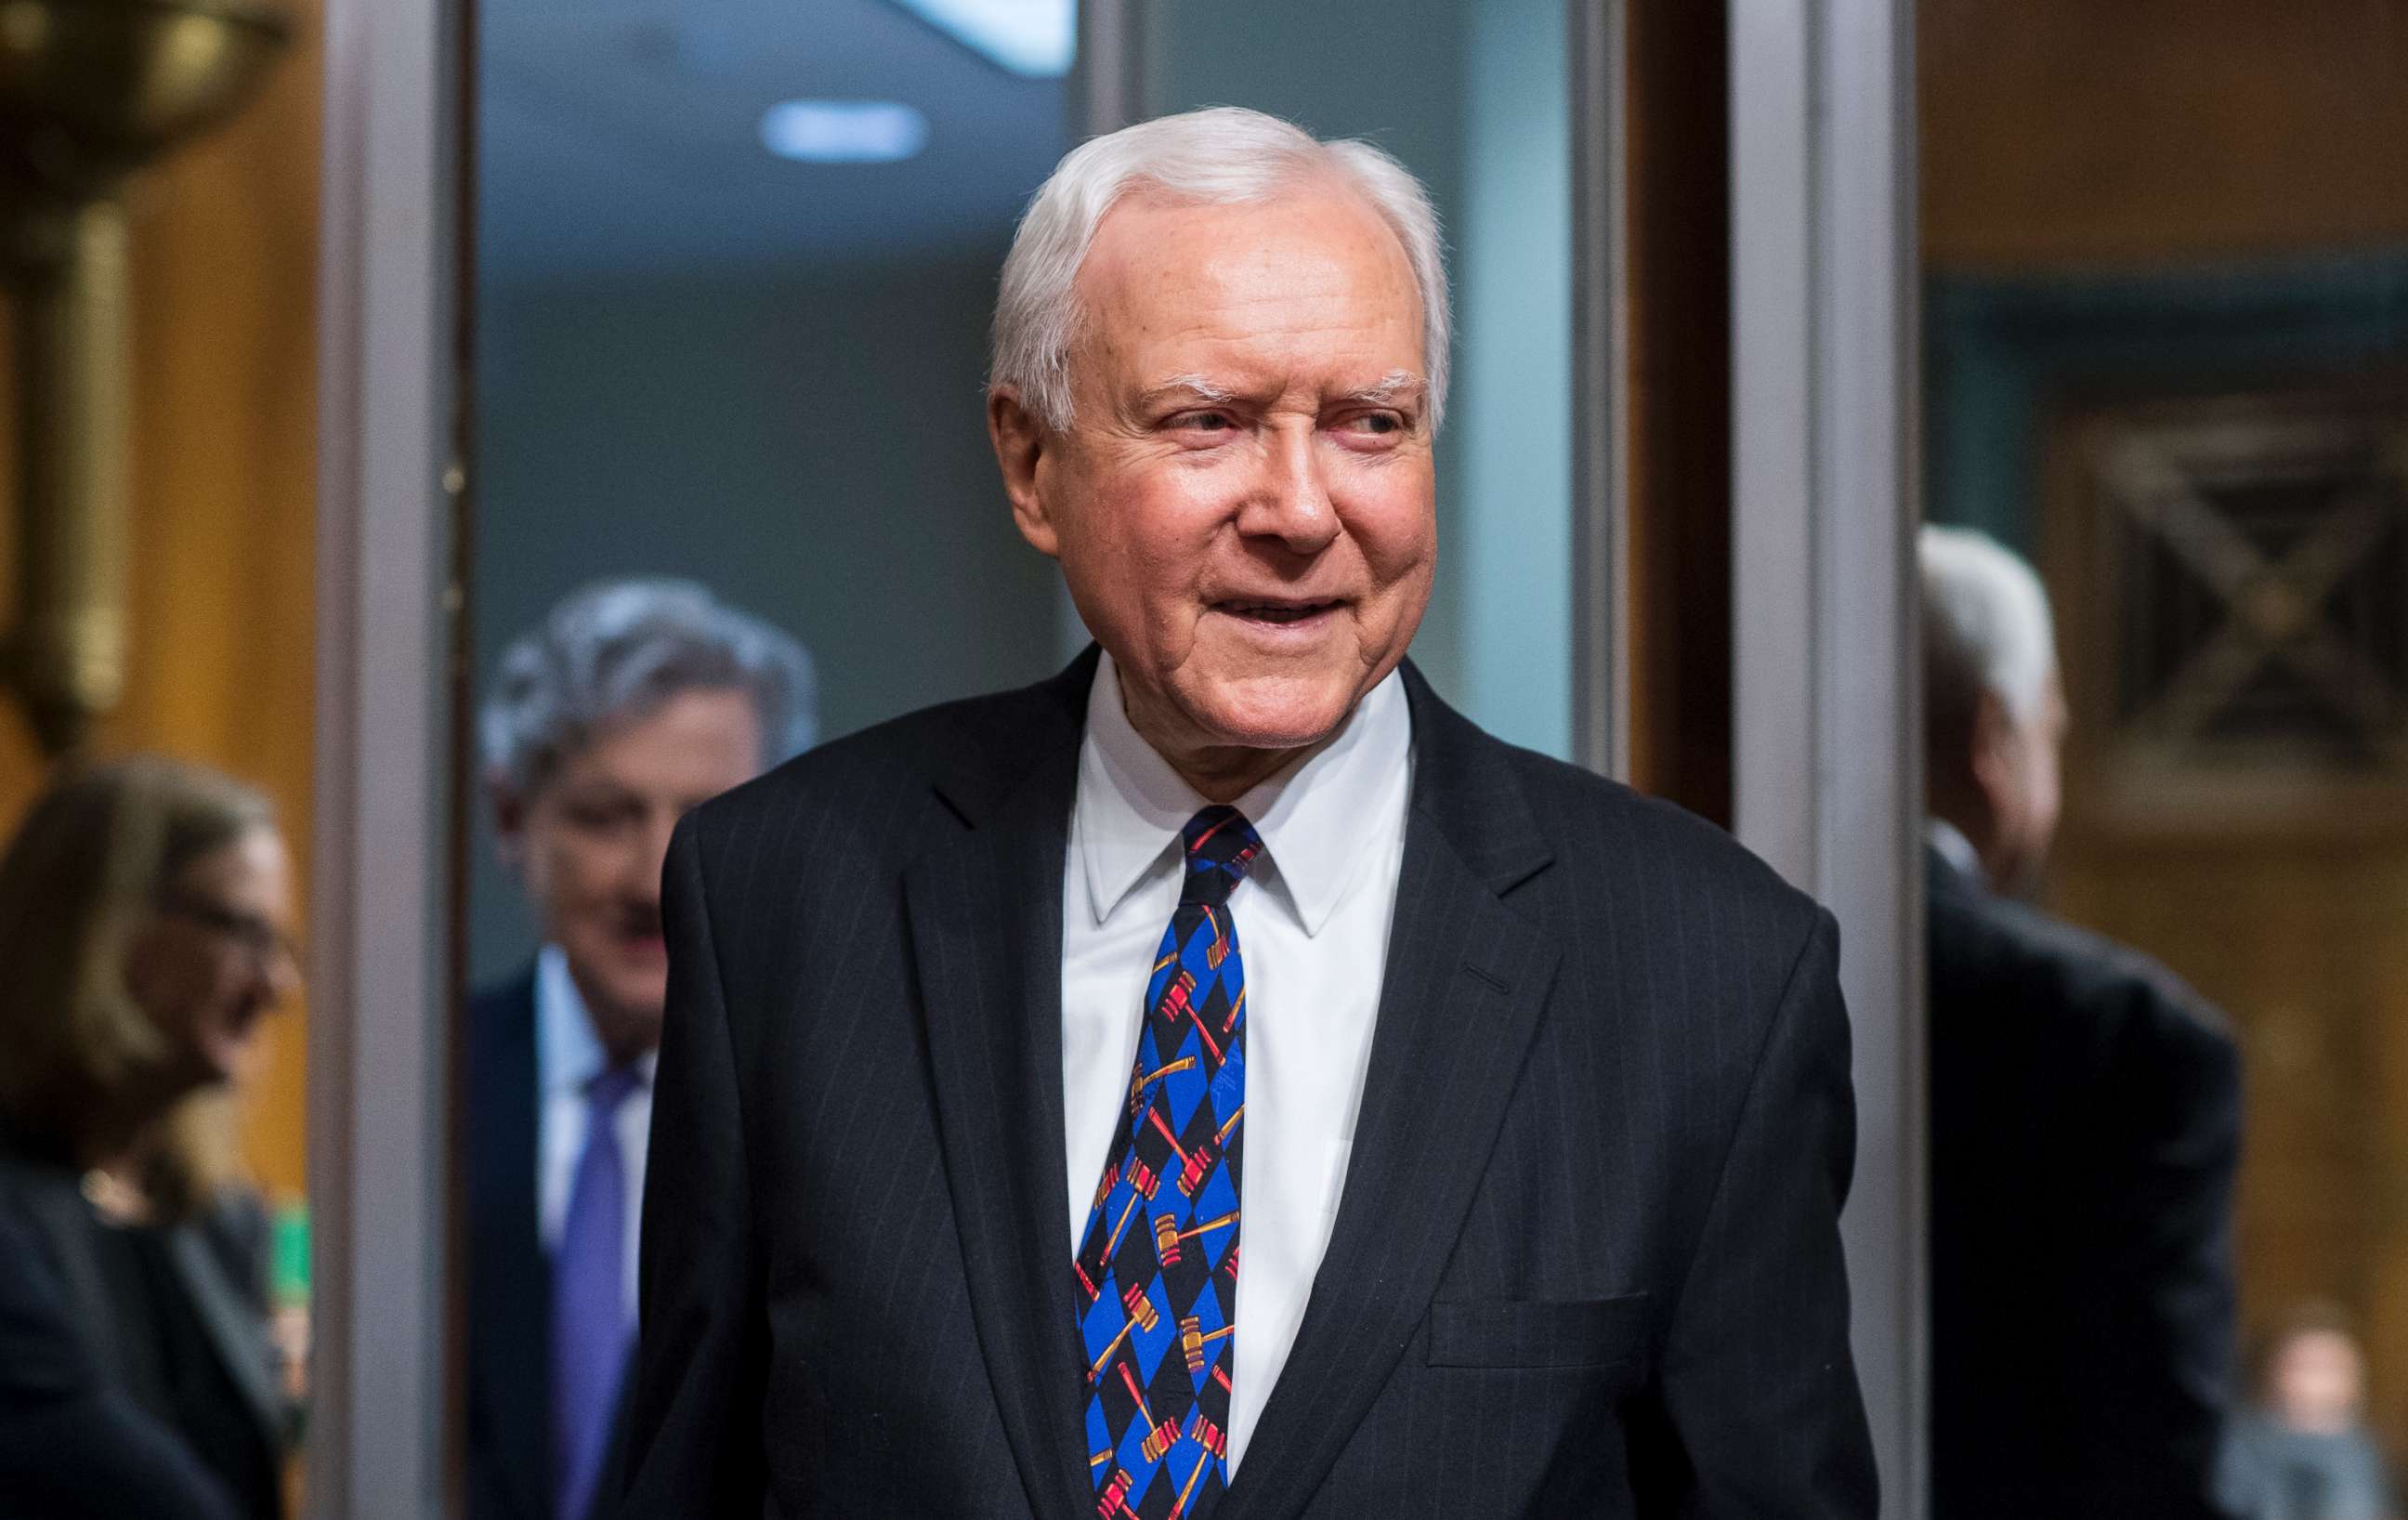 PHOTO: Sen. Orrin Hatch arrives for the Senate Judiciary Committee hearing on "Protecting and Promoting Music Creation for the 21st Century," May 15, 2018. 